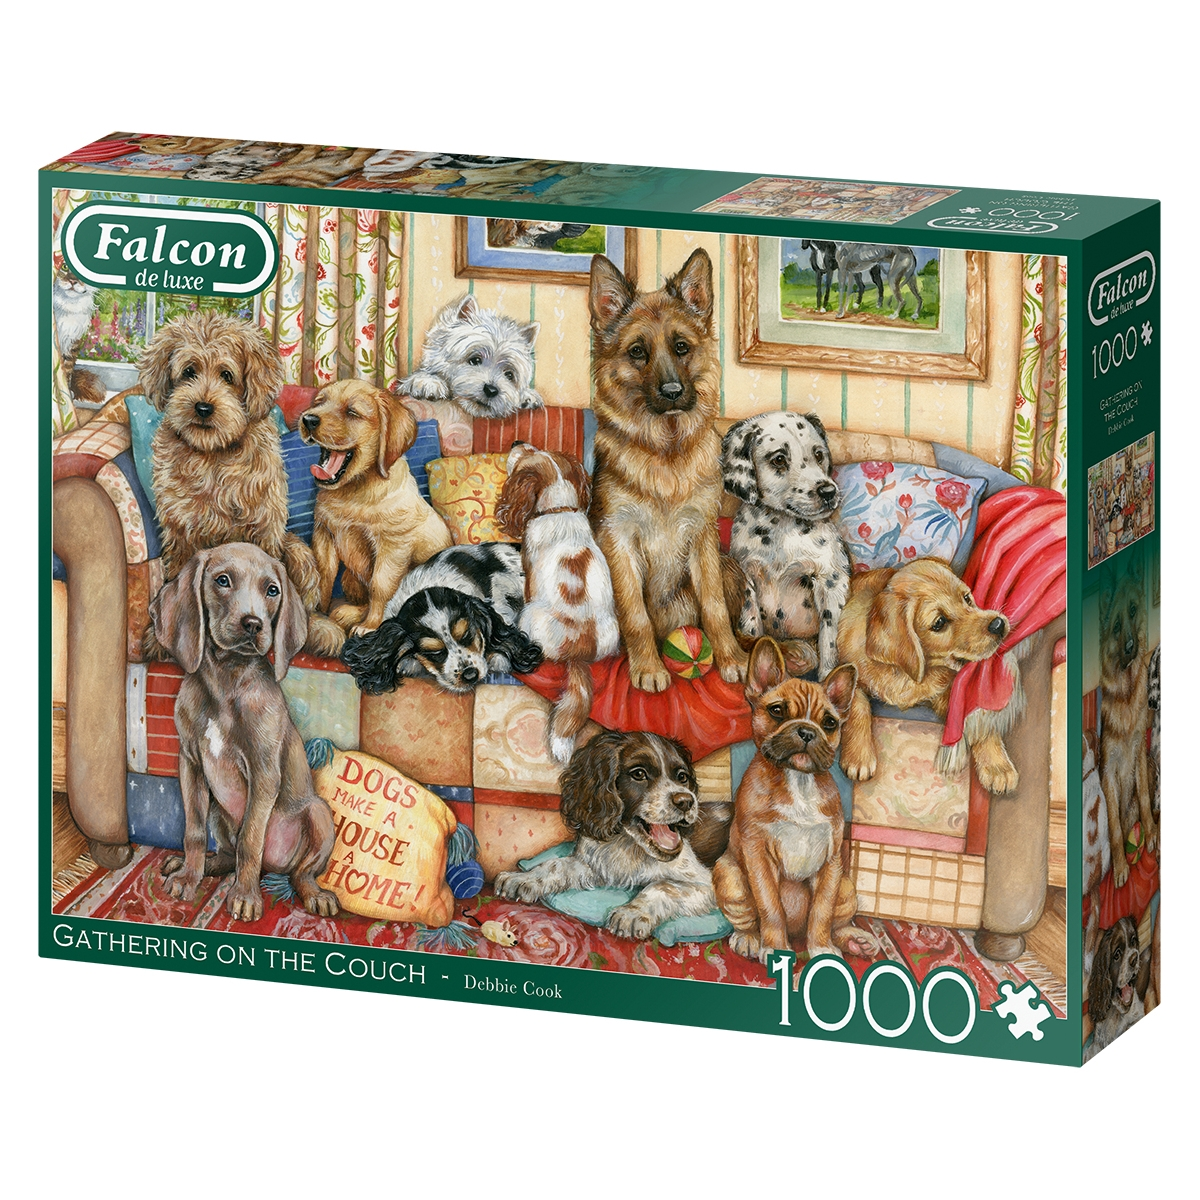 Jumbo on Dog Mehrfarben The FALCON Gathering Puzzle 11293 Zubehör, Couch-1000 Teile